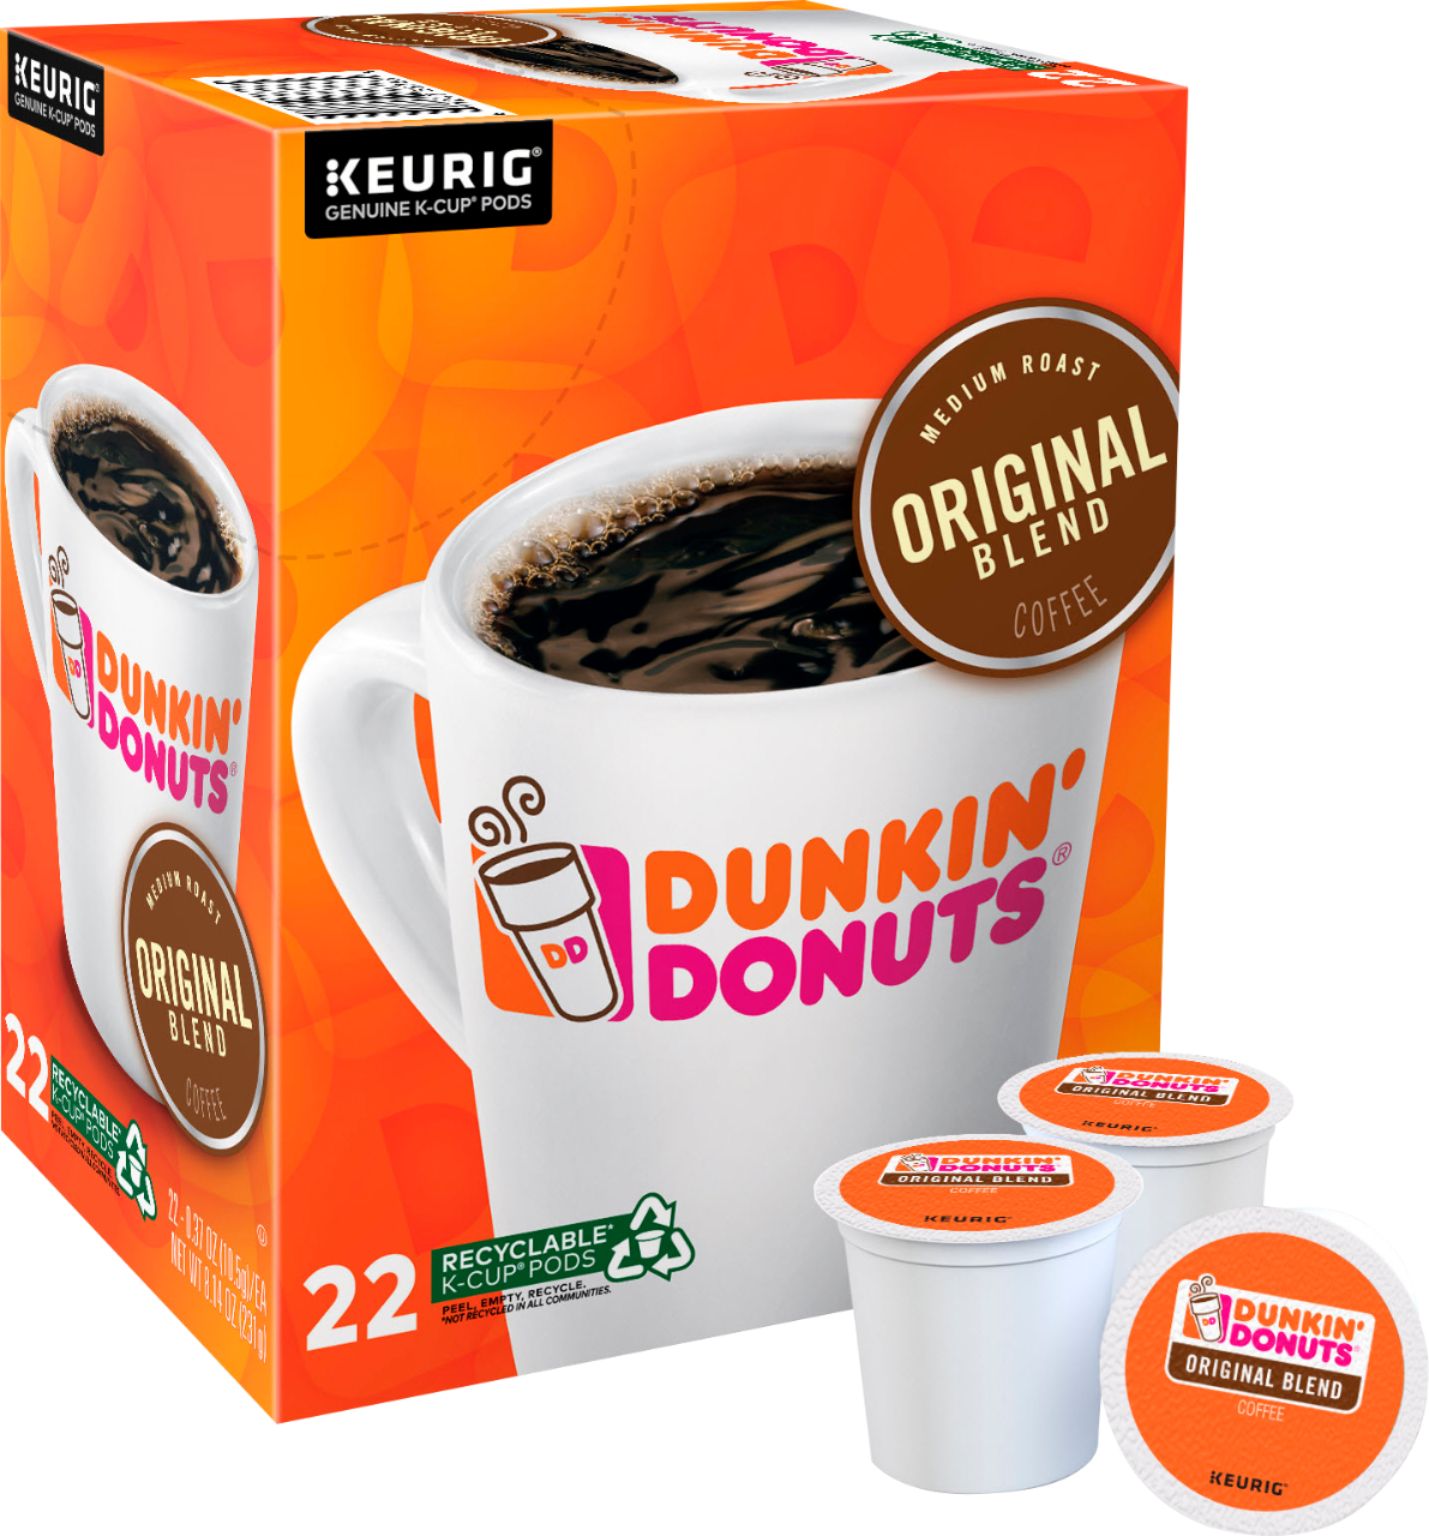 Save 37% on Select 22-ct. or 24-ct. Keurig K-Cup coffee pods for $9.99+Free Curbside Pick Up